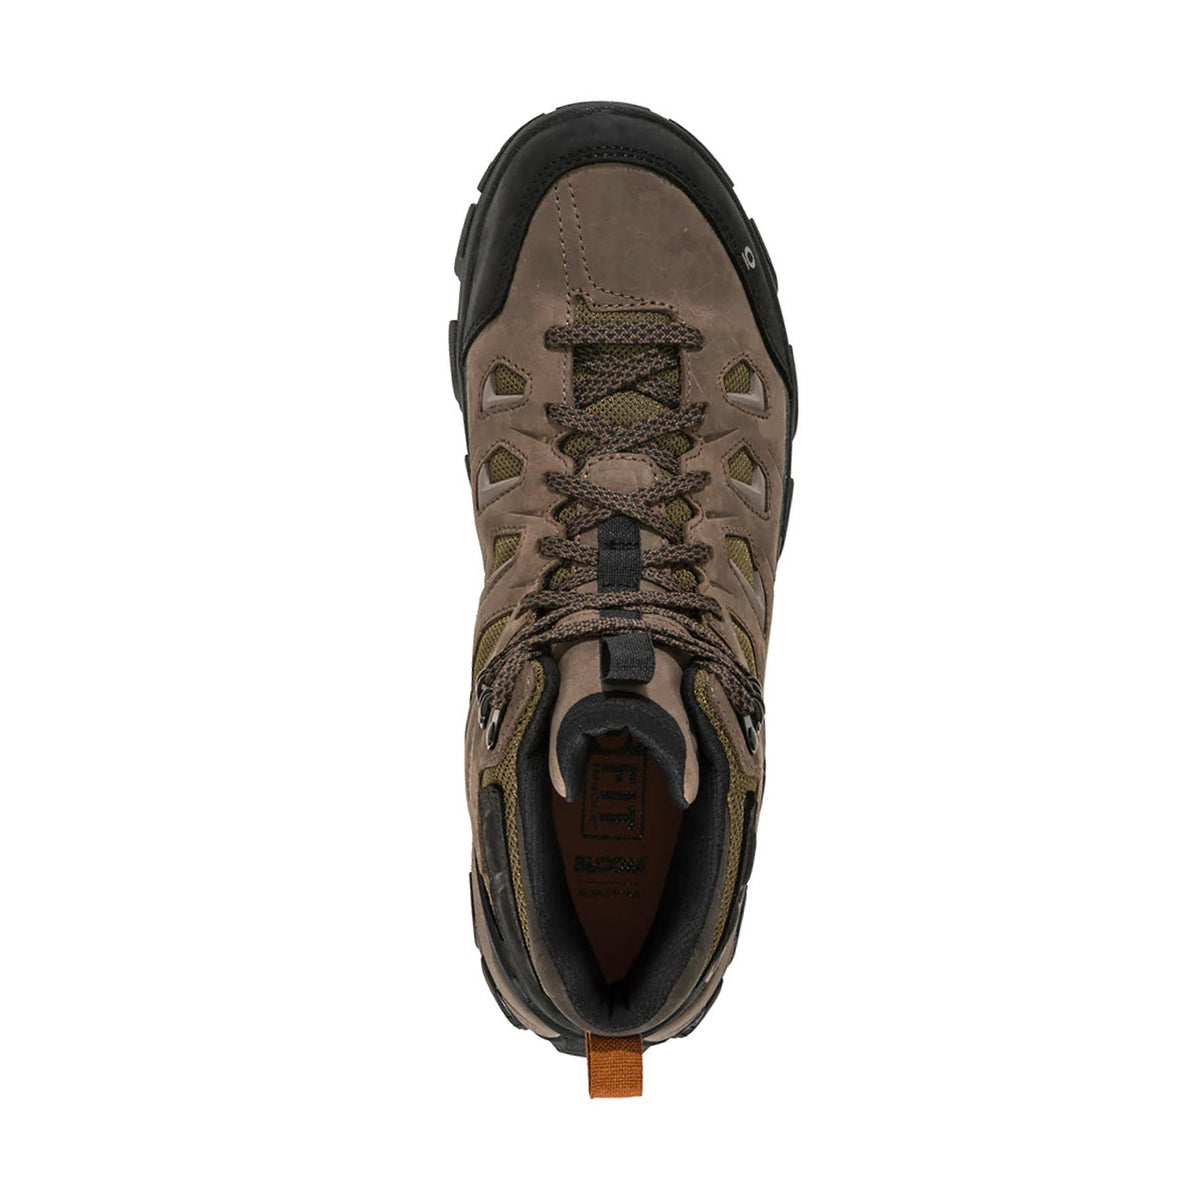 Top view of a brown Oboz Sawtooth X Mid Rockfall hiking shoe with laces and rugged sole design featuring B-DRY waterproof technology on a white background.